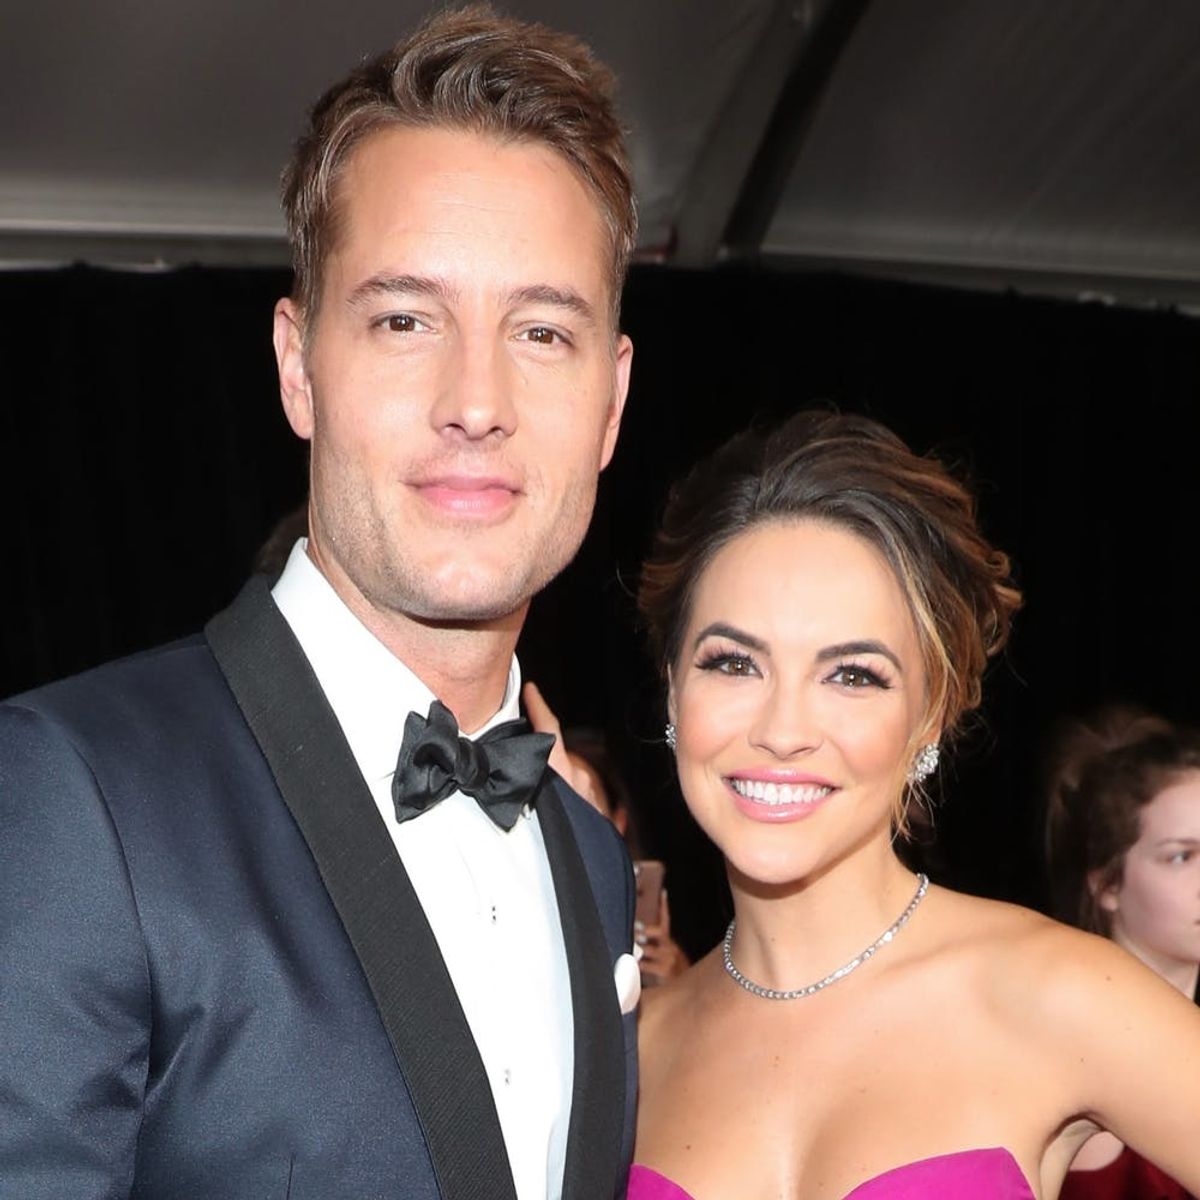 “This Is Us” Star Justin Hartley Just Got Hitched!